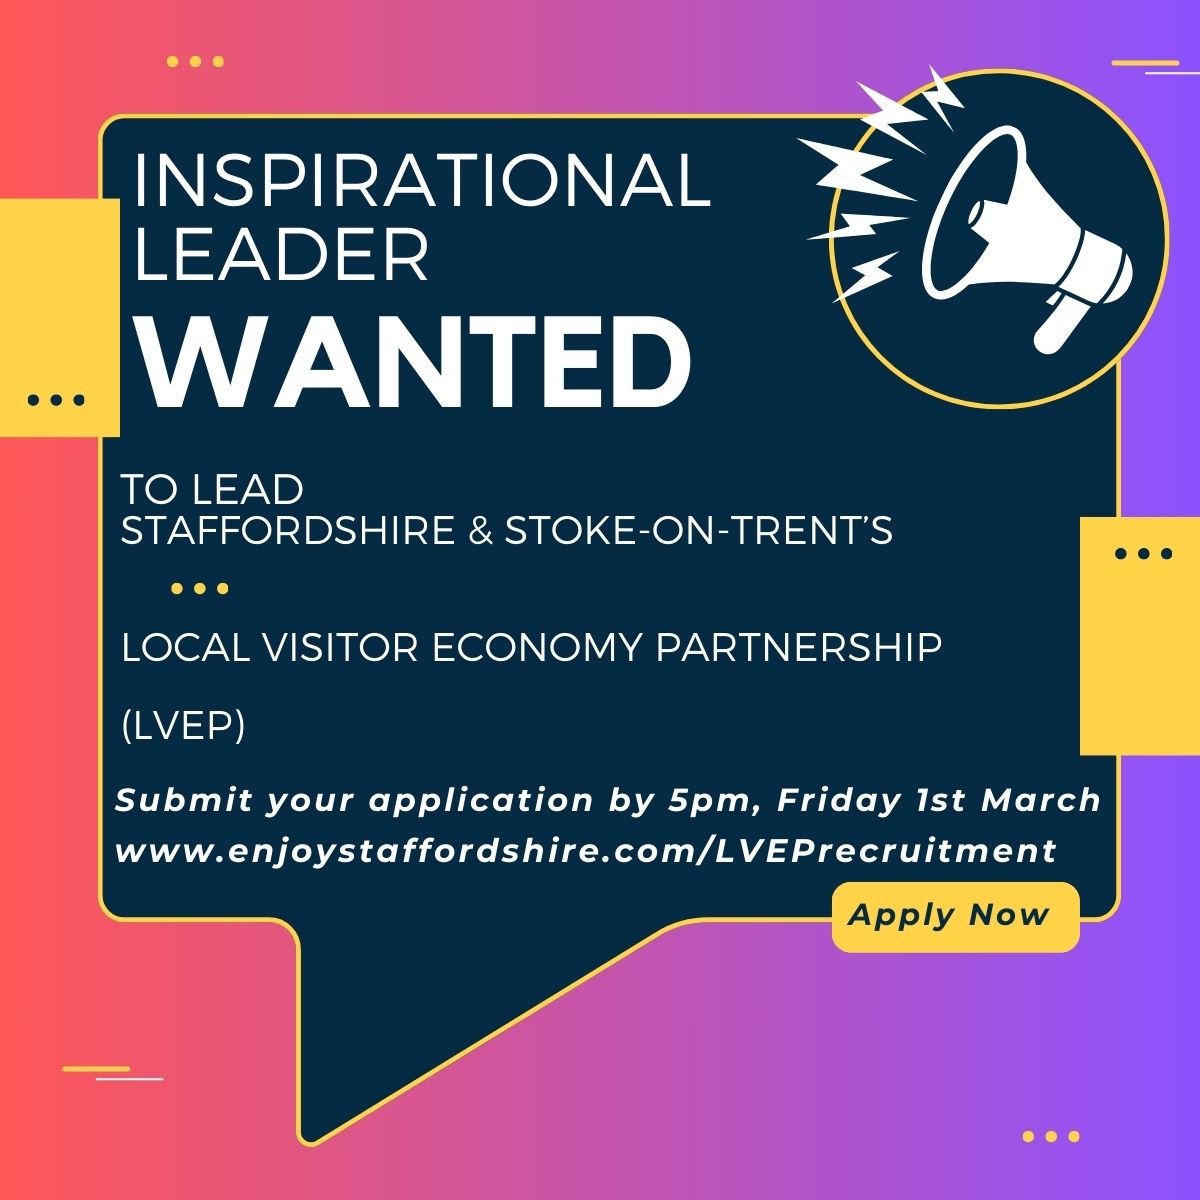 Could YOU be the first chair of the new #Staffordshire & Stoke-on-Trent LVEP Board?

We are looking for a senior leader to play a pivotal role in the growth and development of the tourism & hospitality sector in the county.

Find out more at enjoystaffordshire.com/LVEPrecruitment

#EnjoyStaffs